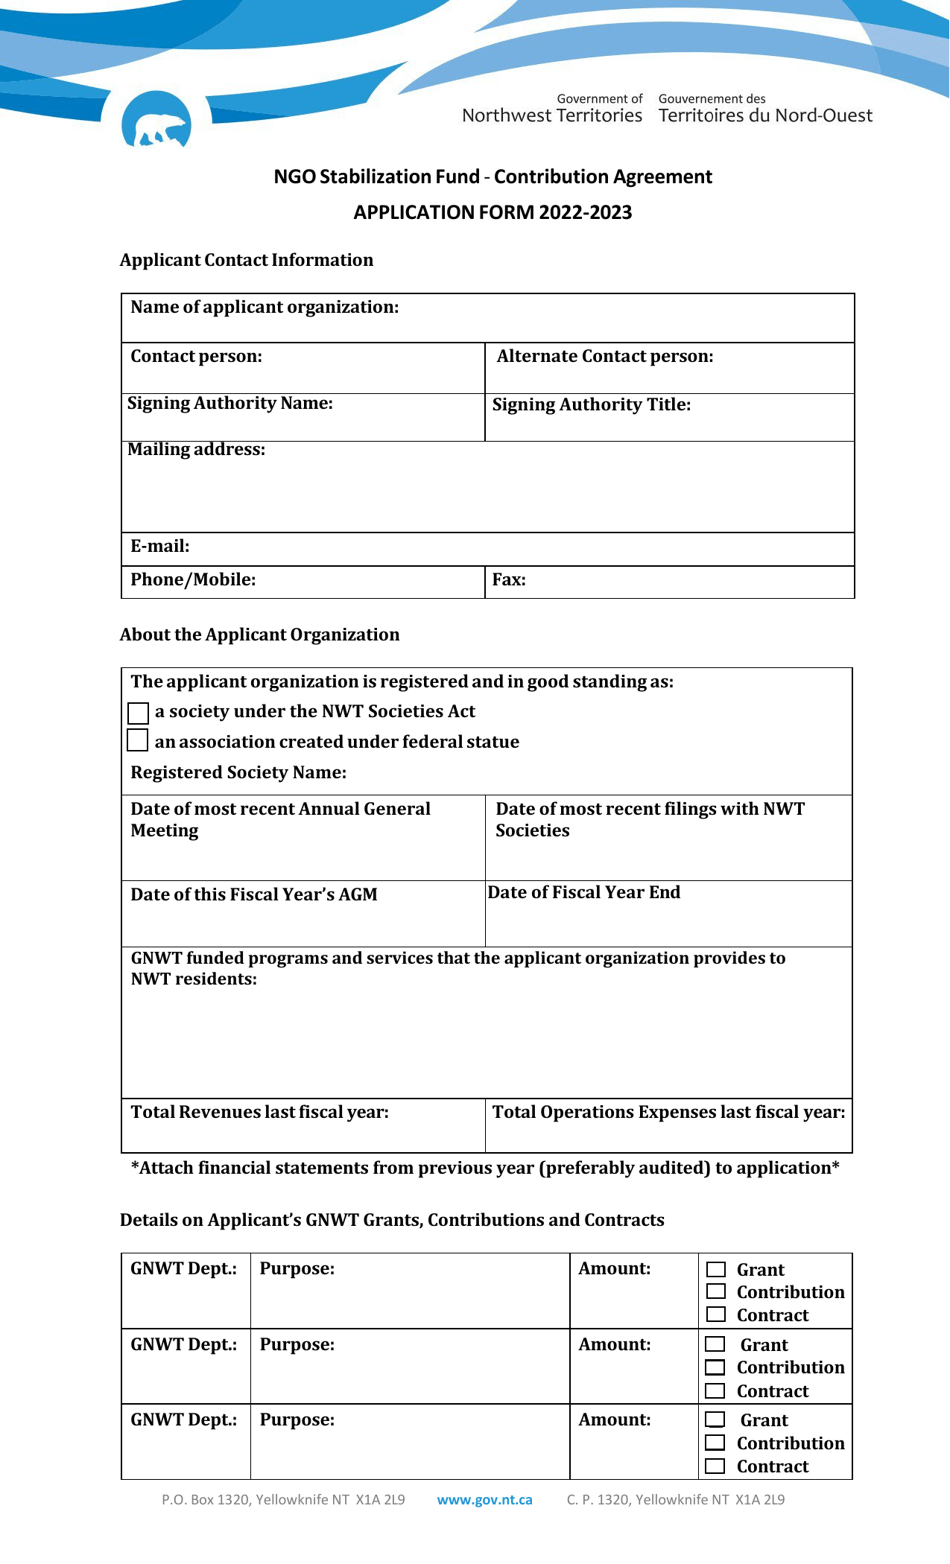 Contribution Agreement Application Form - Ngo Stabilization Fund - Northwest Territories, Canada, Page 1